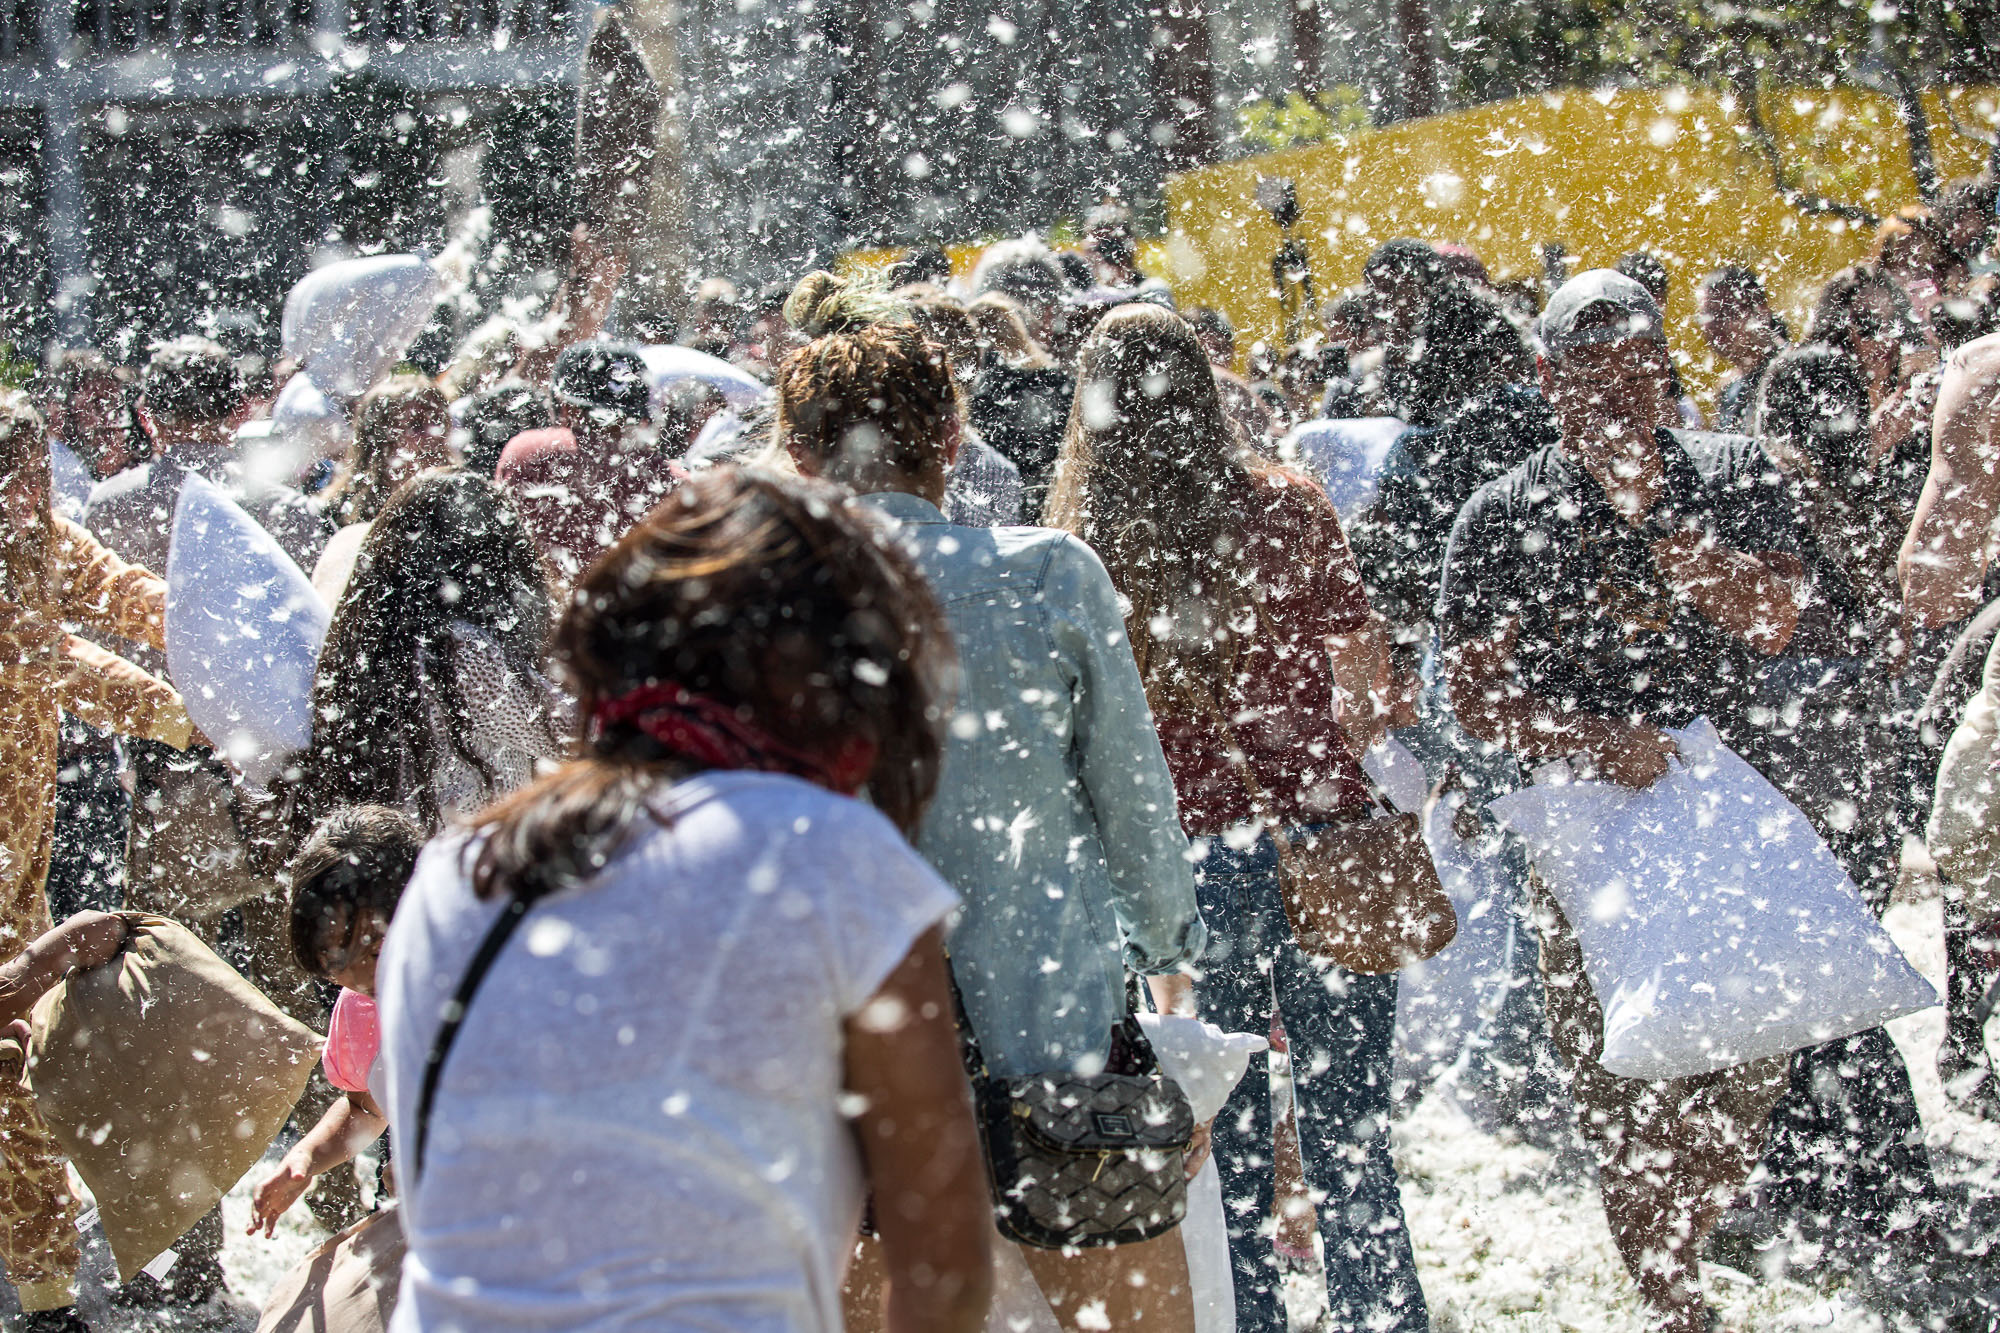  Participants take part in a giant pillow fight as feathers fly in Pershing Square in Downtown Los Angles on Saturday, April 1 2017. Hundreds of people traded soft blows in a giant pillow fight that dwarfed even the biggest slumber party slugfest. Th